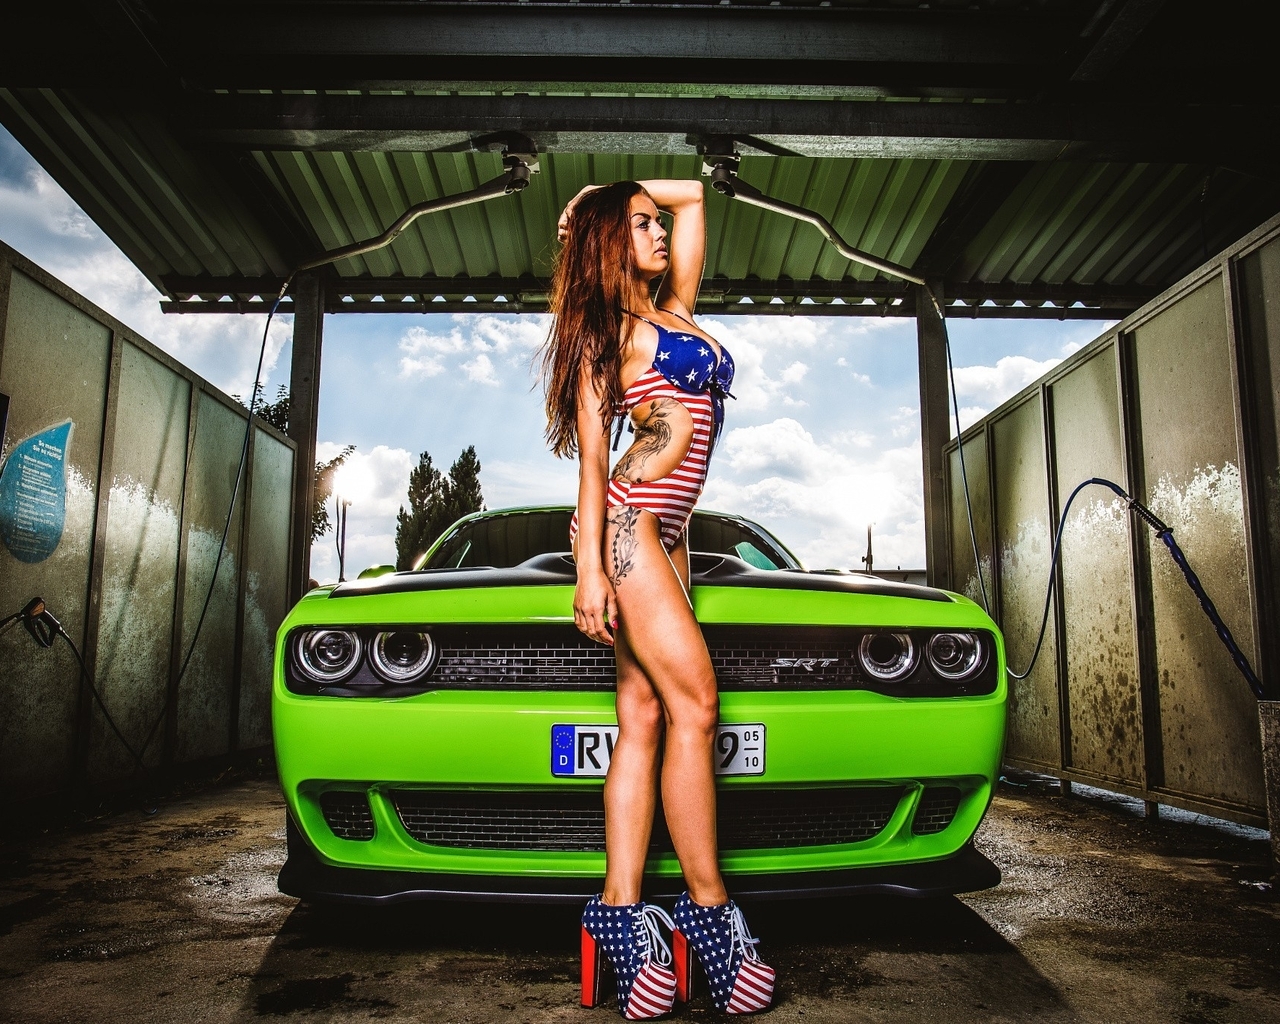 Image: Girl, swimsuit, tattoo, shoes, car wash, car, America, green